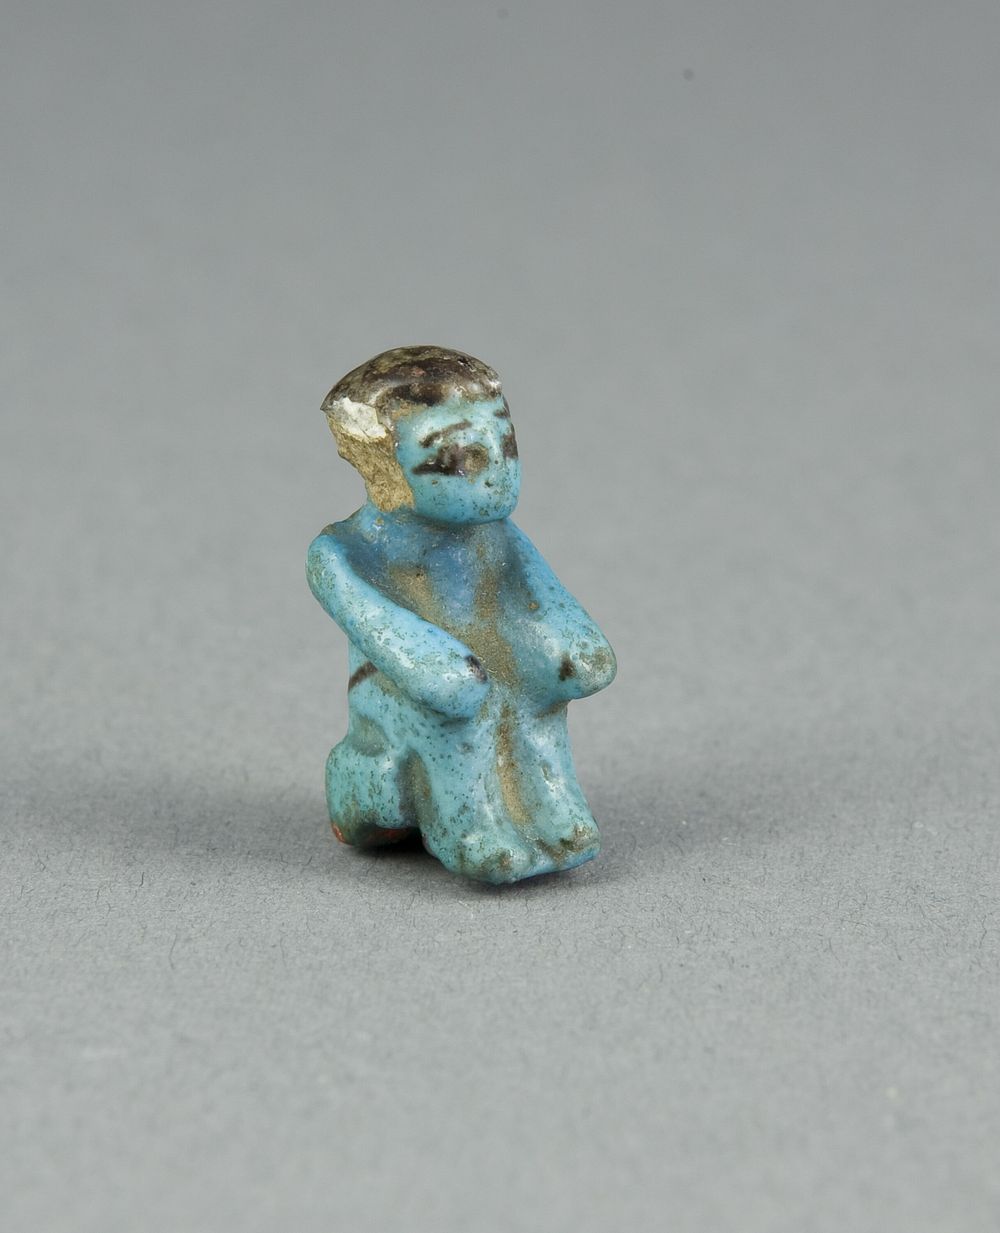 Figurine of a Seated Man by Ancient Egyptian